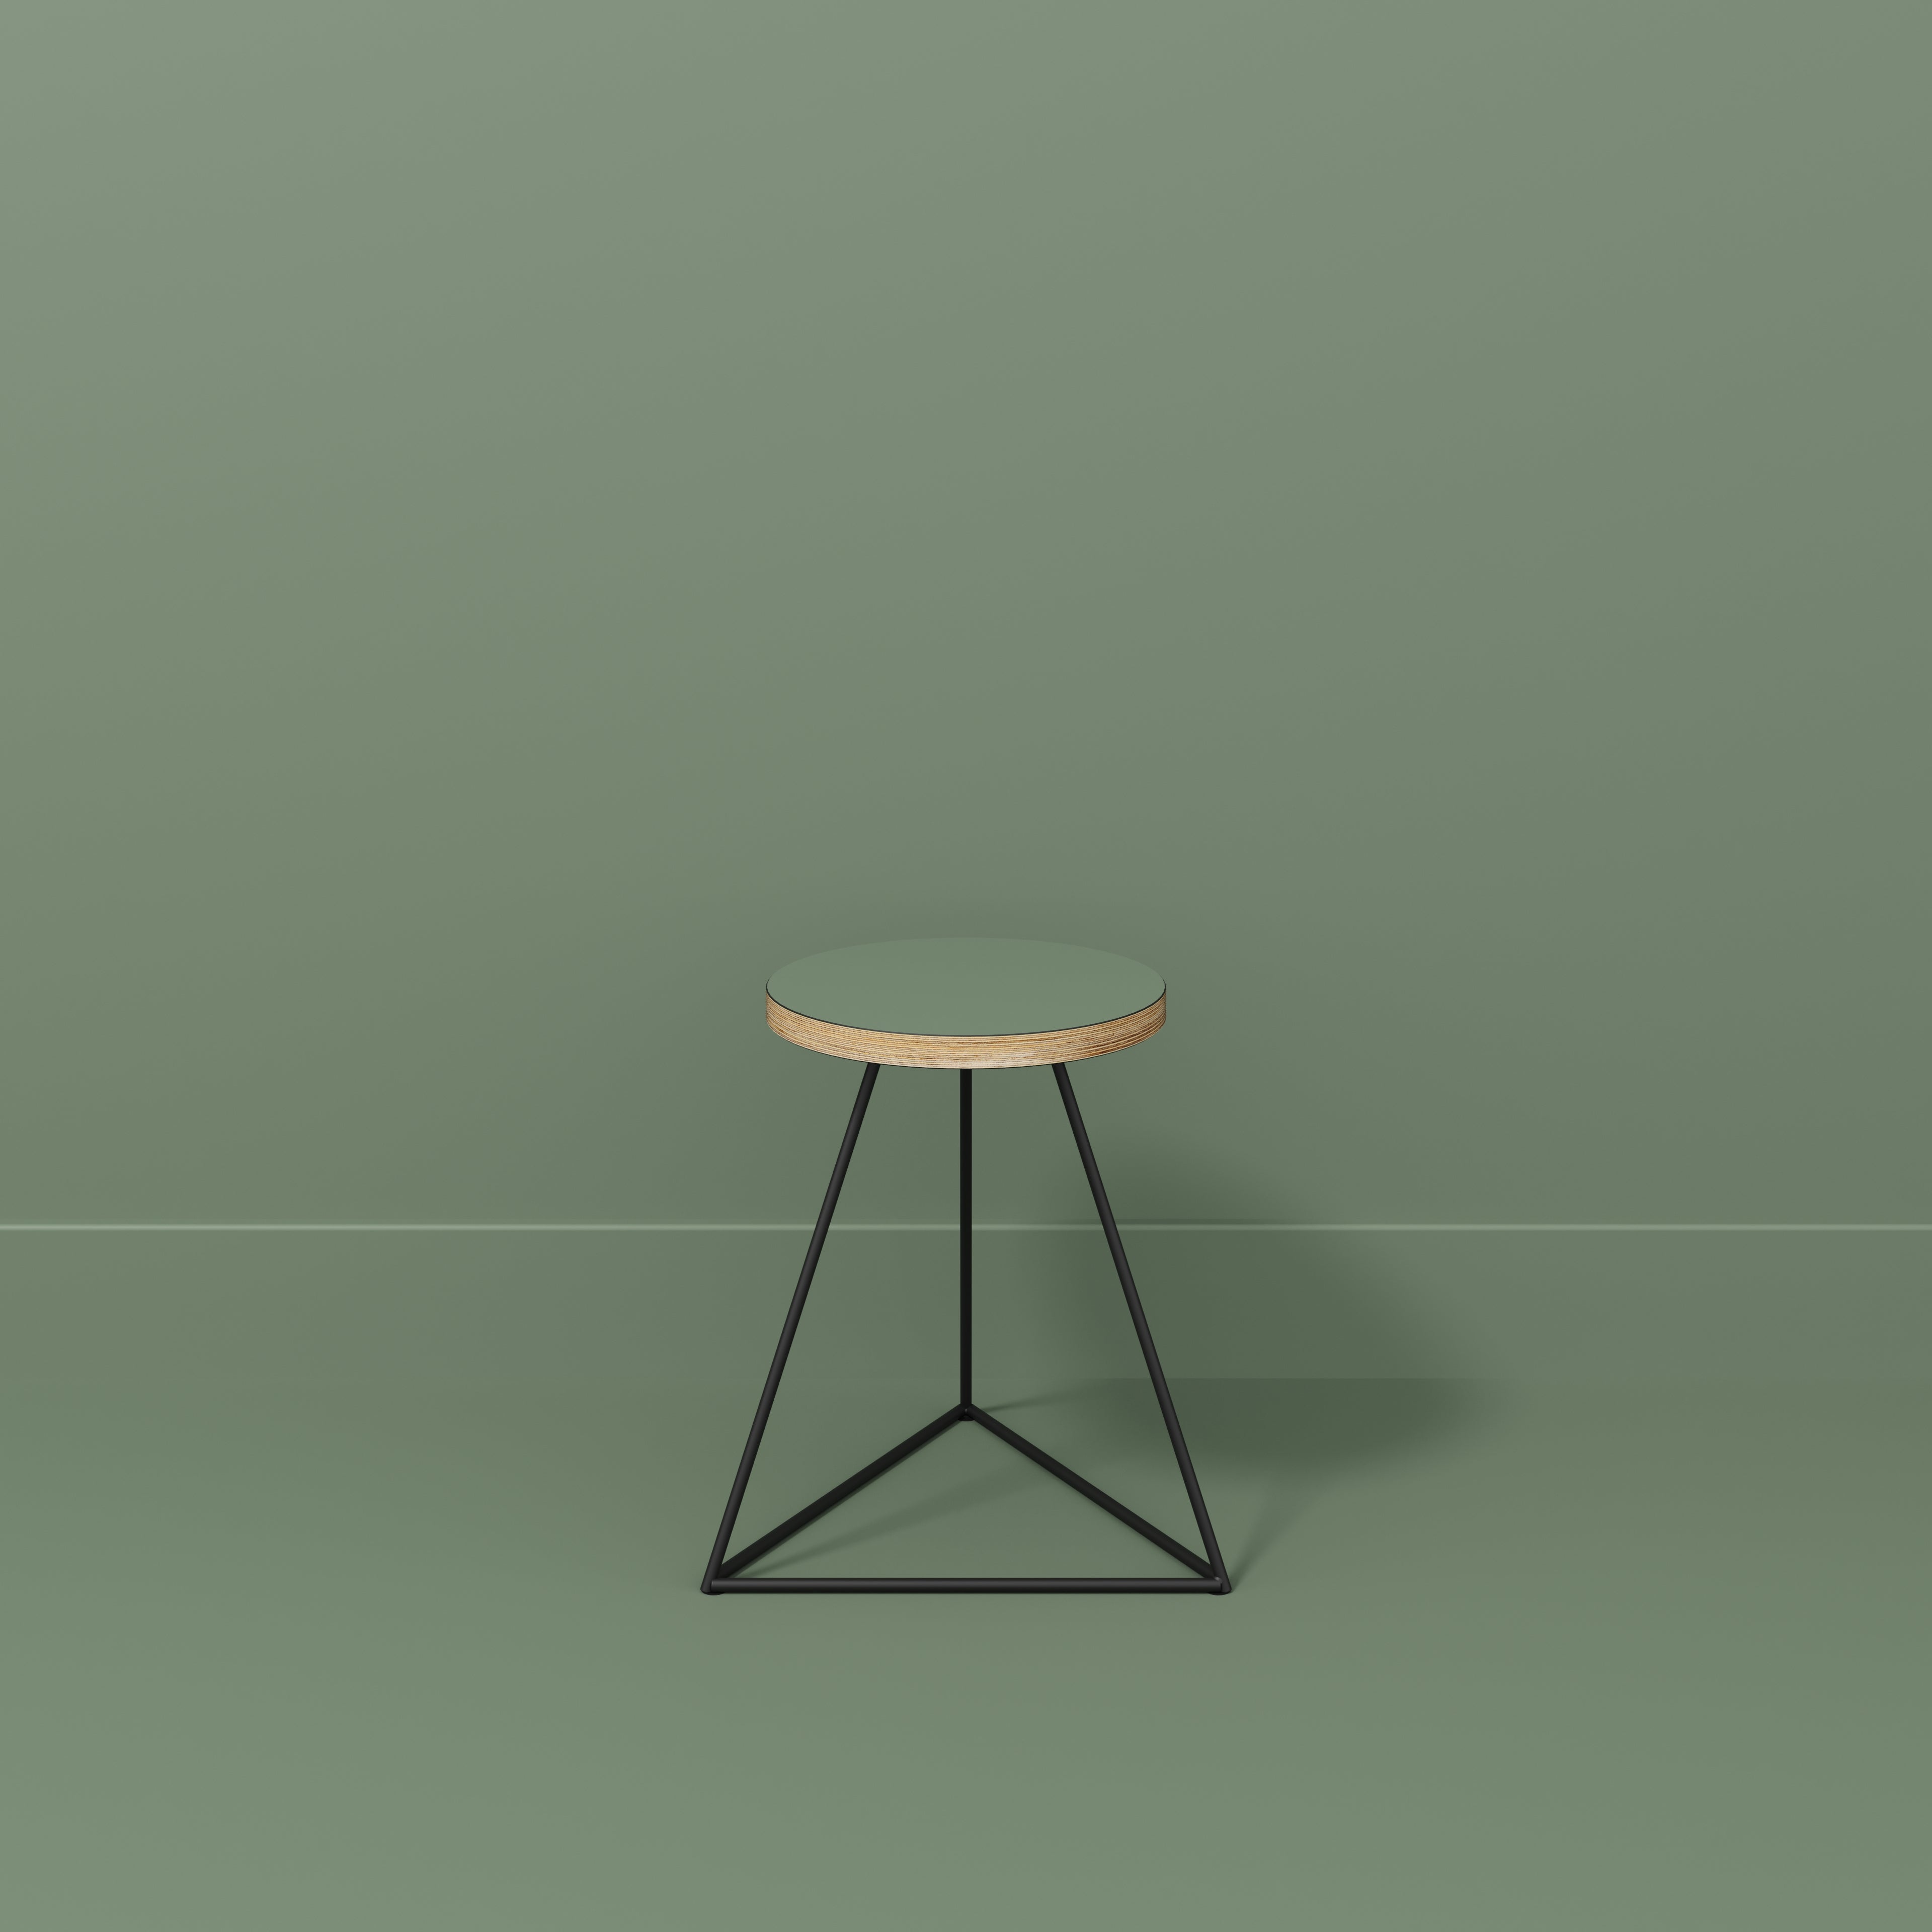 Stool with Black Prism Base - Formica Green Slate